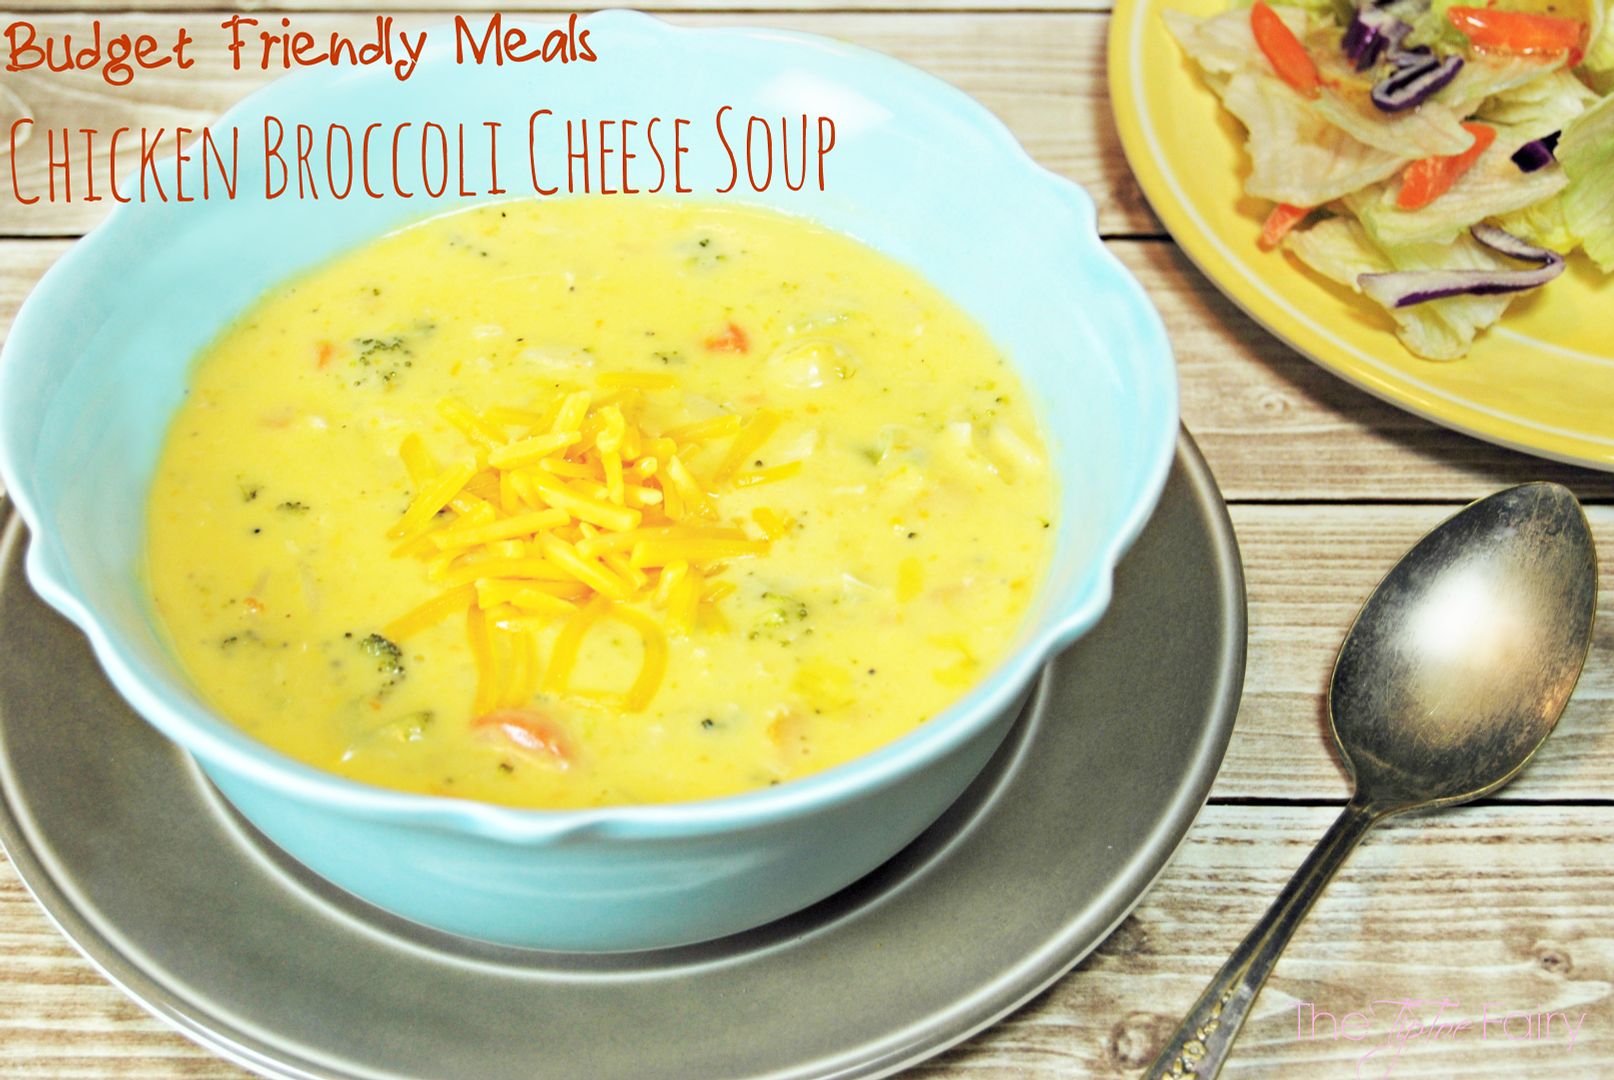 Chicken Broccoli Cheese Soup - budget friendly meal, less than $20 for the whole family | The TipToe Fairy #RollintoSavings #shop #cbias #souprecipes #macncheese